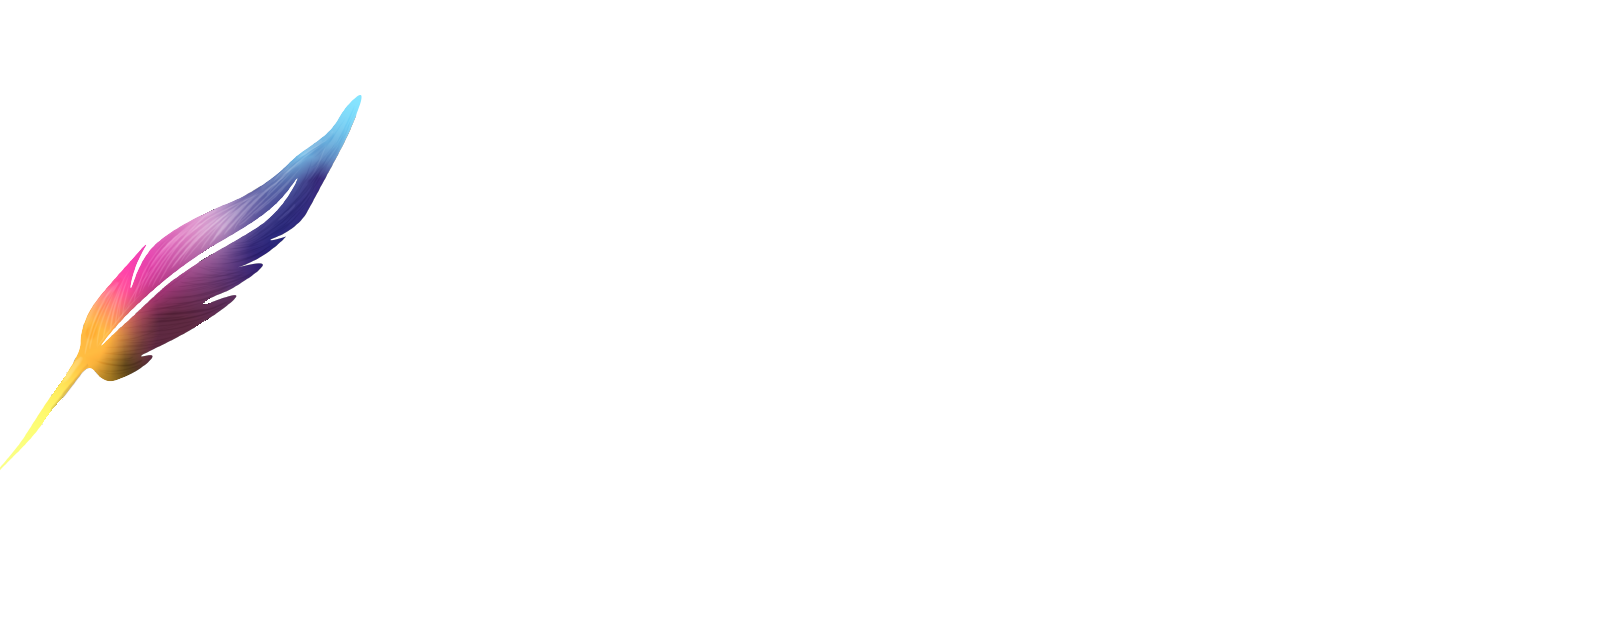 cropped-cropped-logo-final-ps-with-name